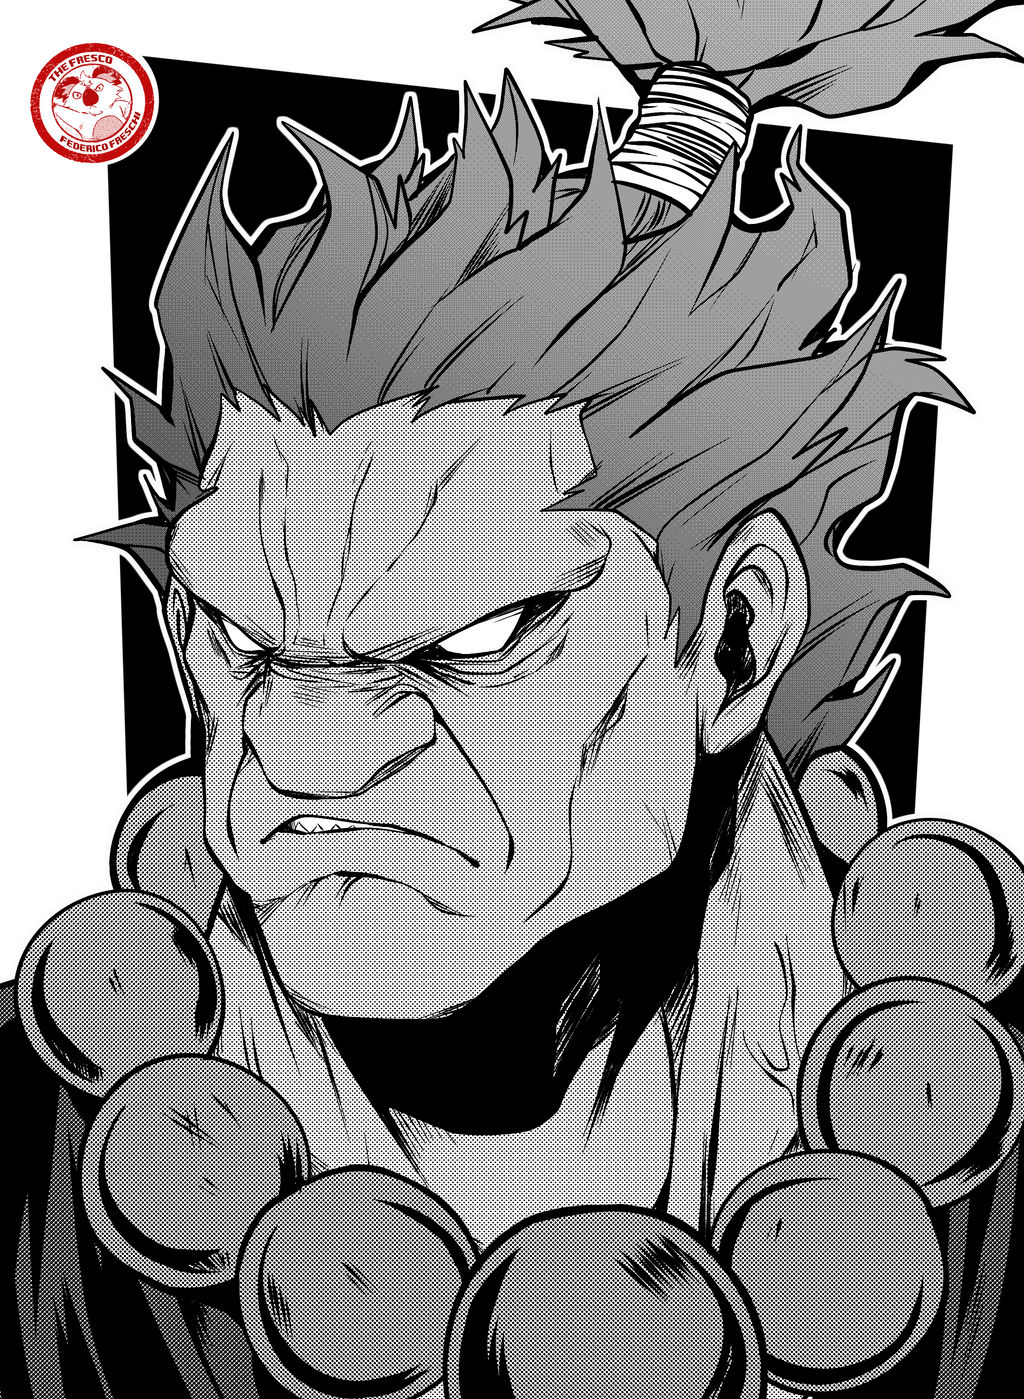 akuma (street fighter and 1 more) drawn by davecavedraws